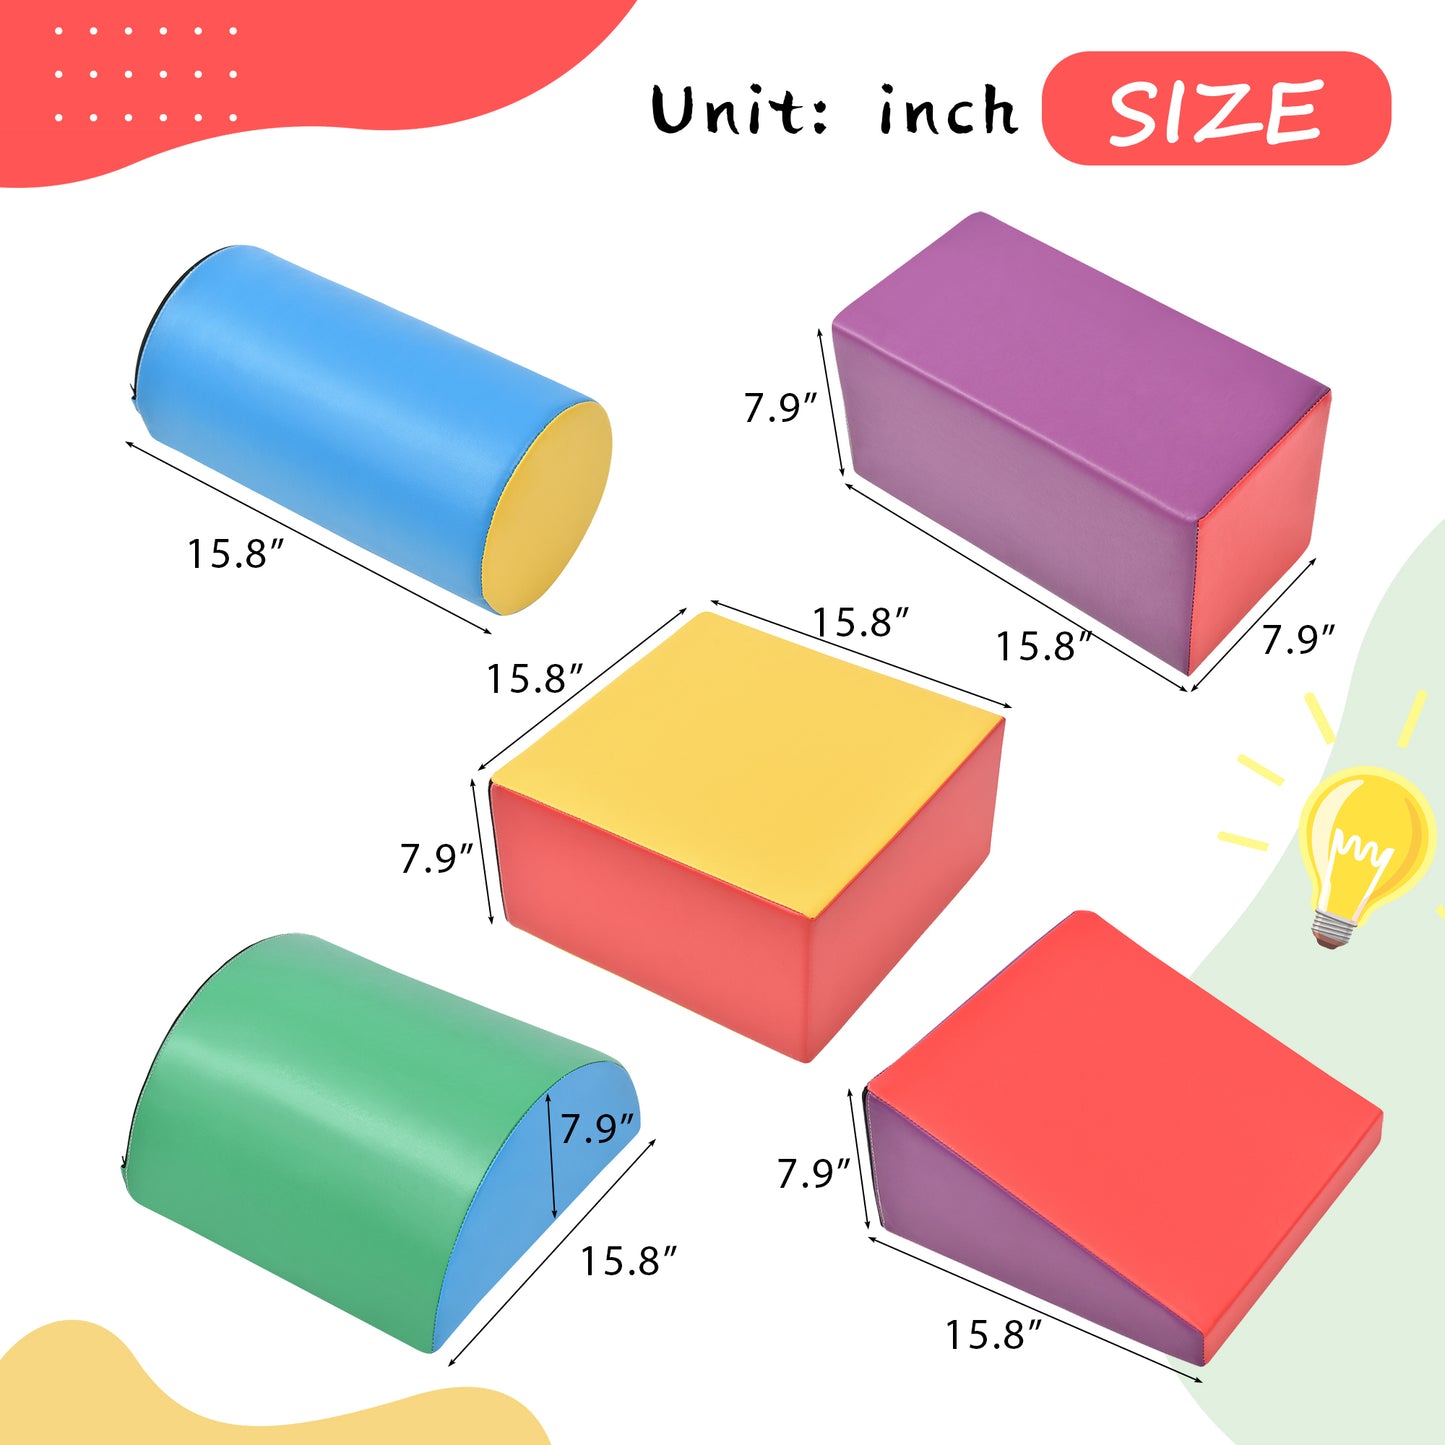 Soft Climb and Crawl Foam Playset, Safe Soft Foam Nugget Shapes Block for Infants, Preschools, Toddlers, Kids Crawling and Climbing Indoor Active Stacking Play Structure